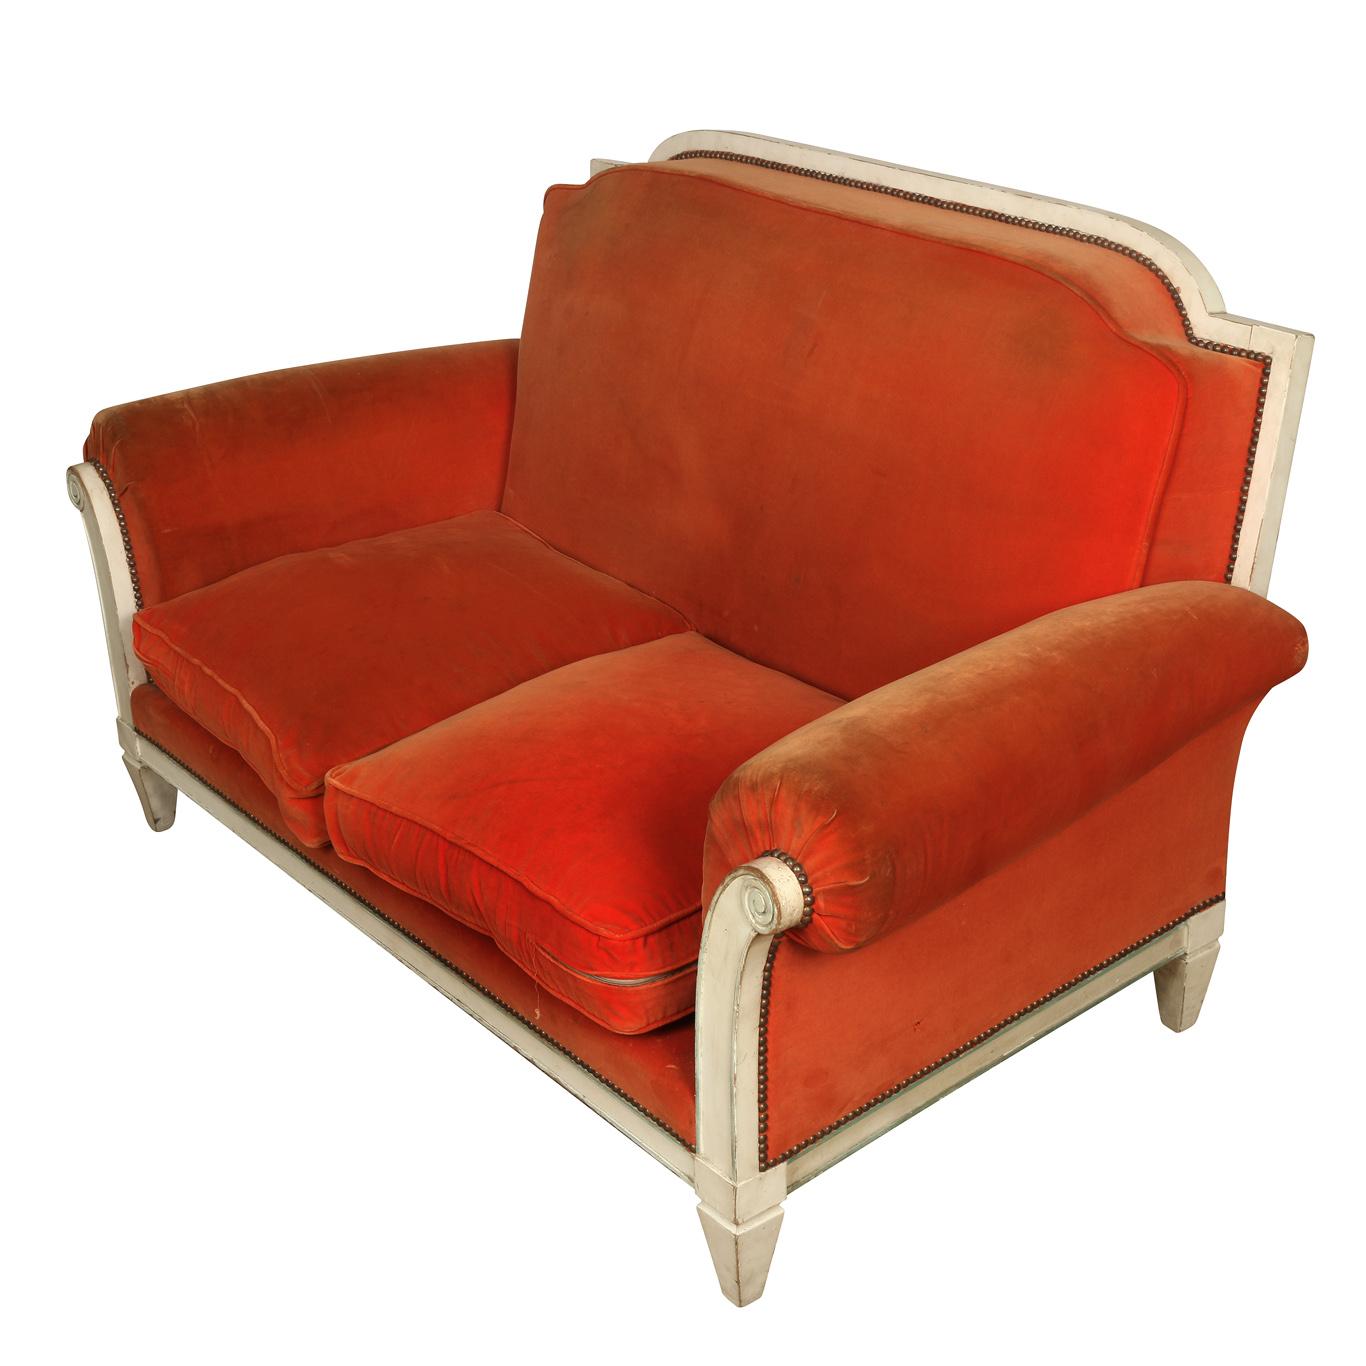 Jansen style loveseat with frame painted white, circa 1940. Shaped with curved arms, tight back and two seat cushions.